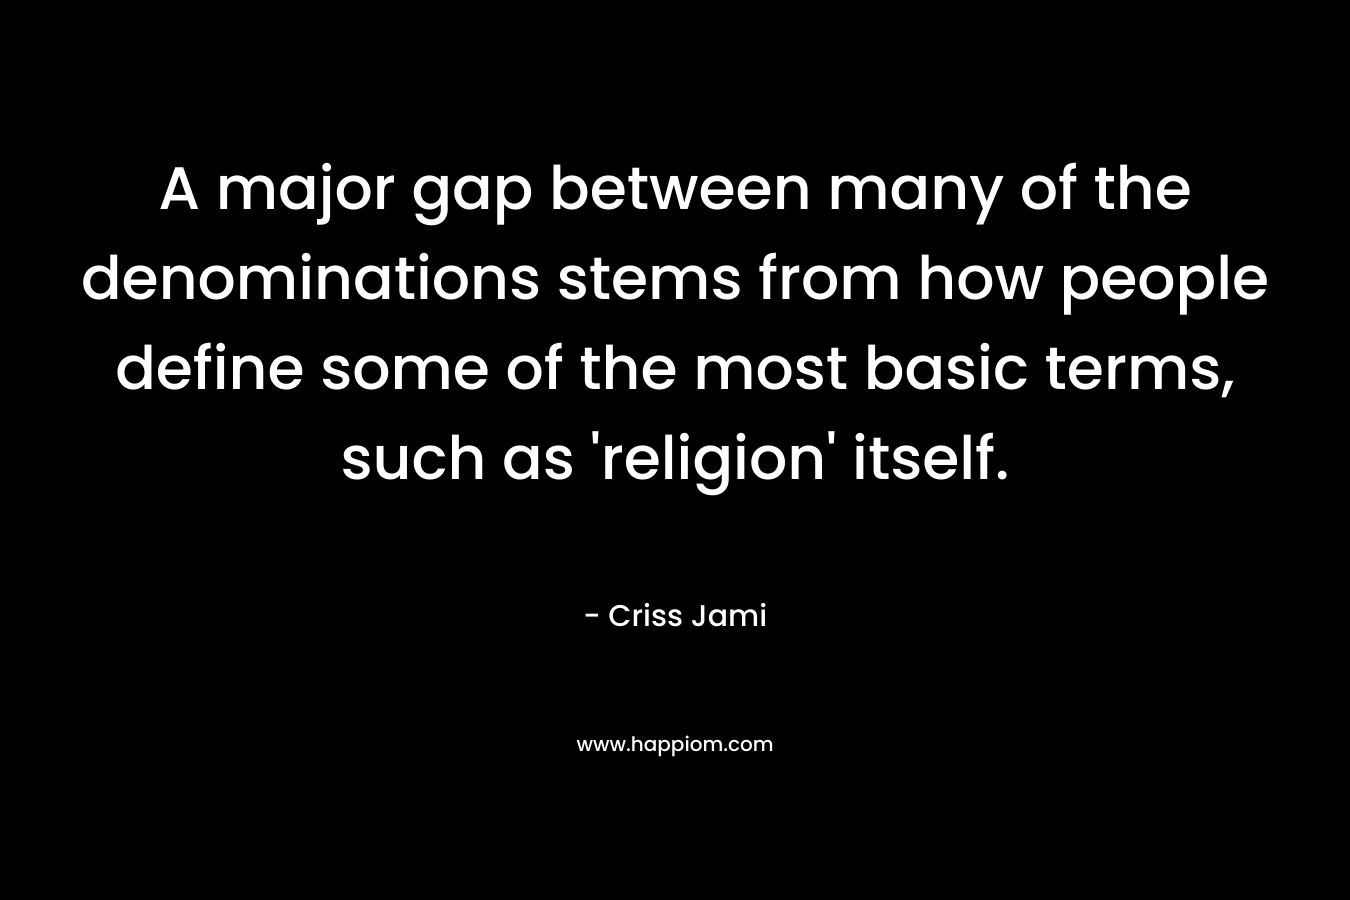 A major gap between many of the denominations stems from how people define some of the most basic terms, such as ‘religion’ itself. – Criss Jami